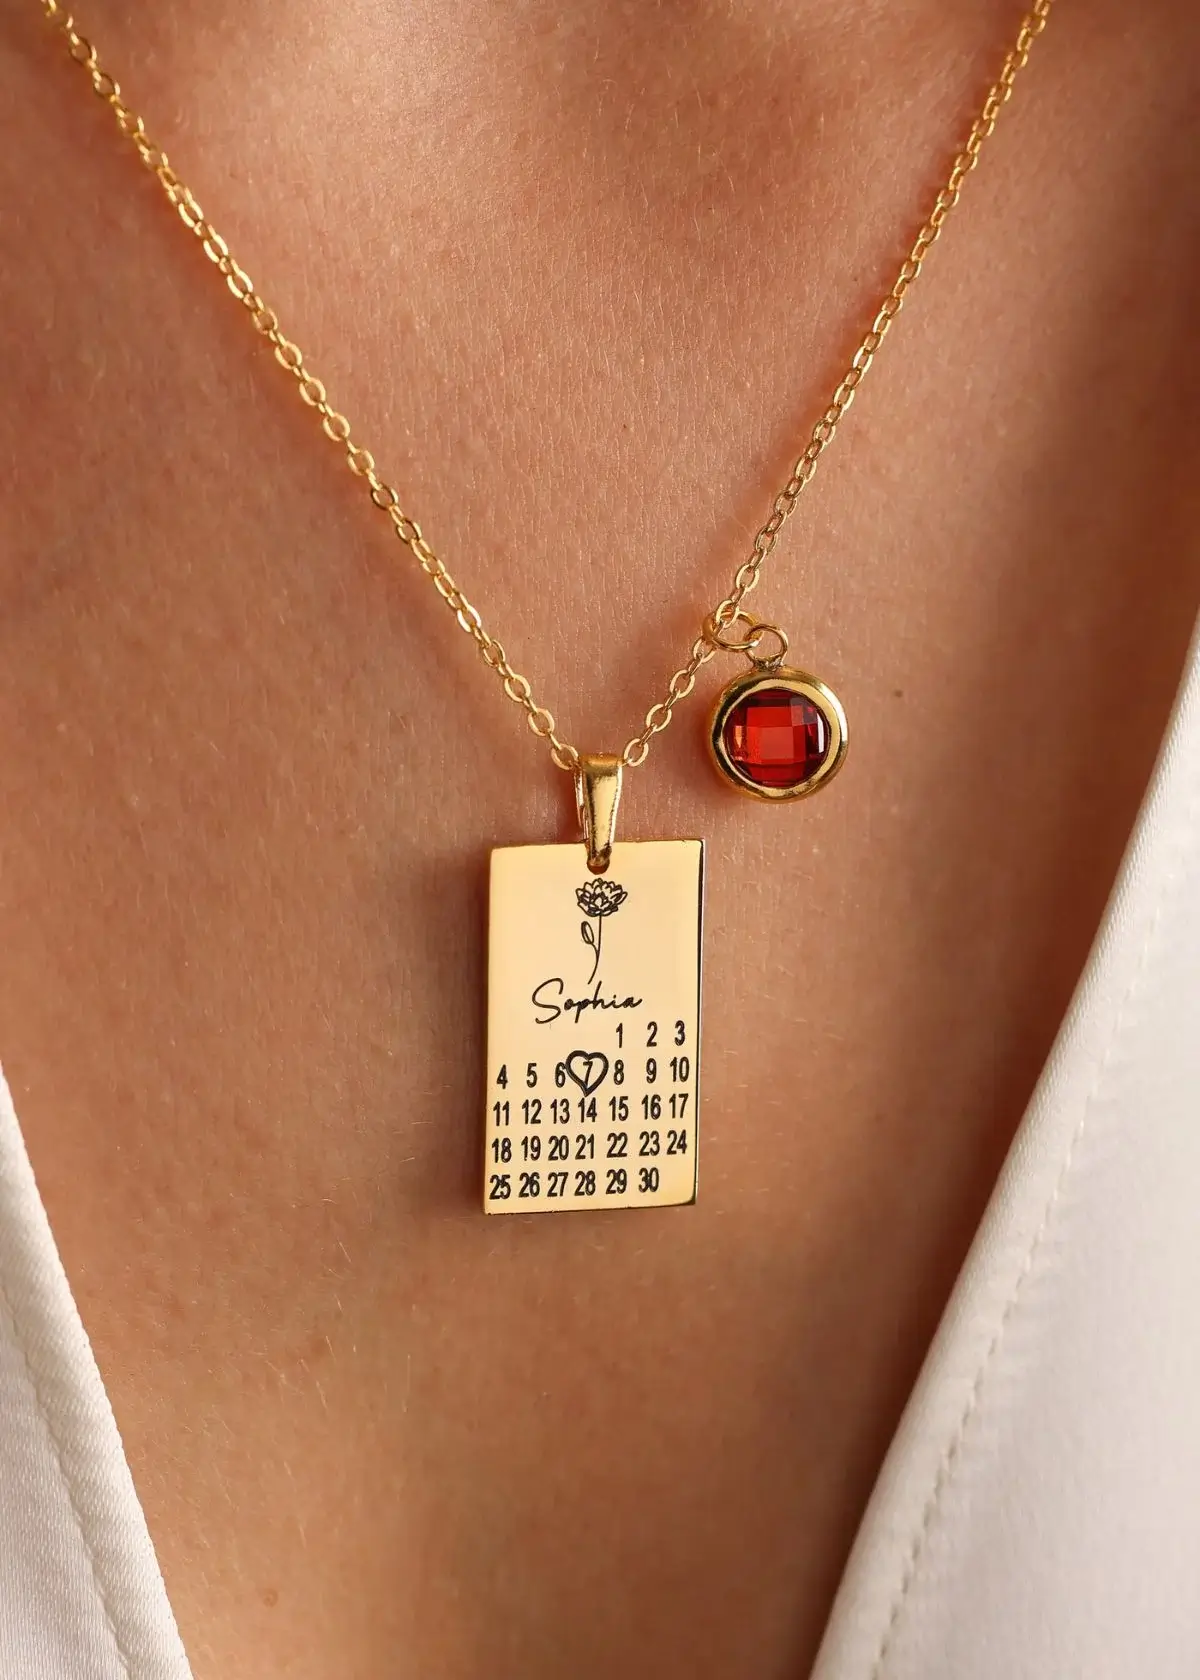 How to choose the right calendar necklace?